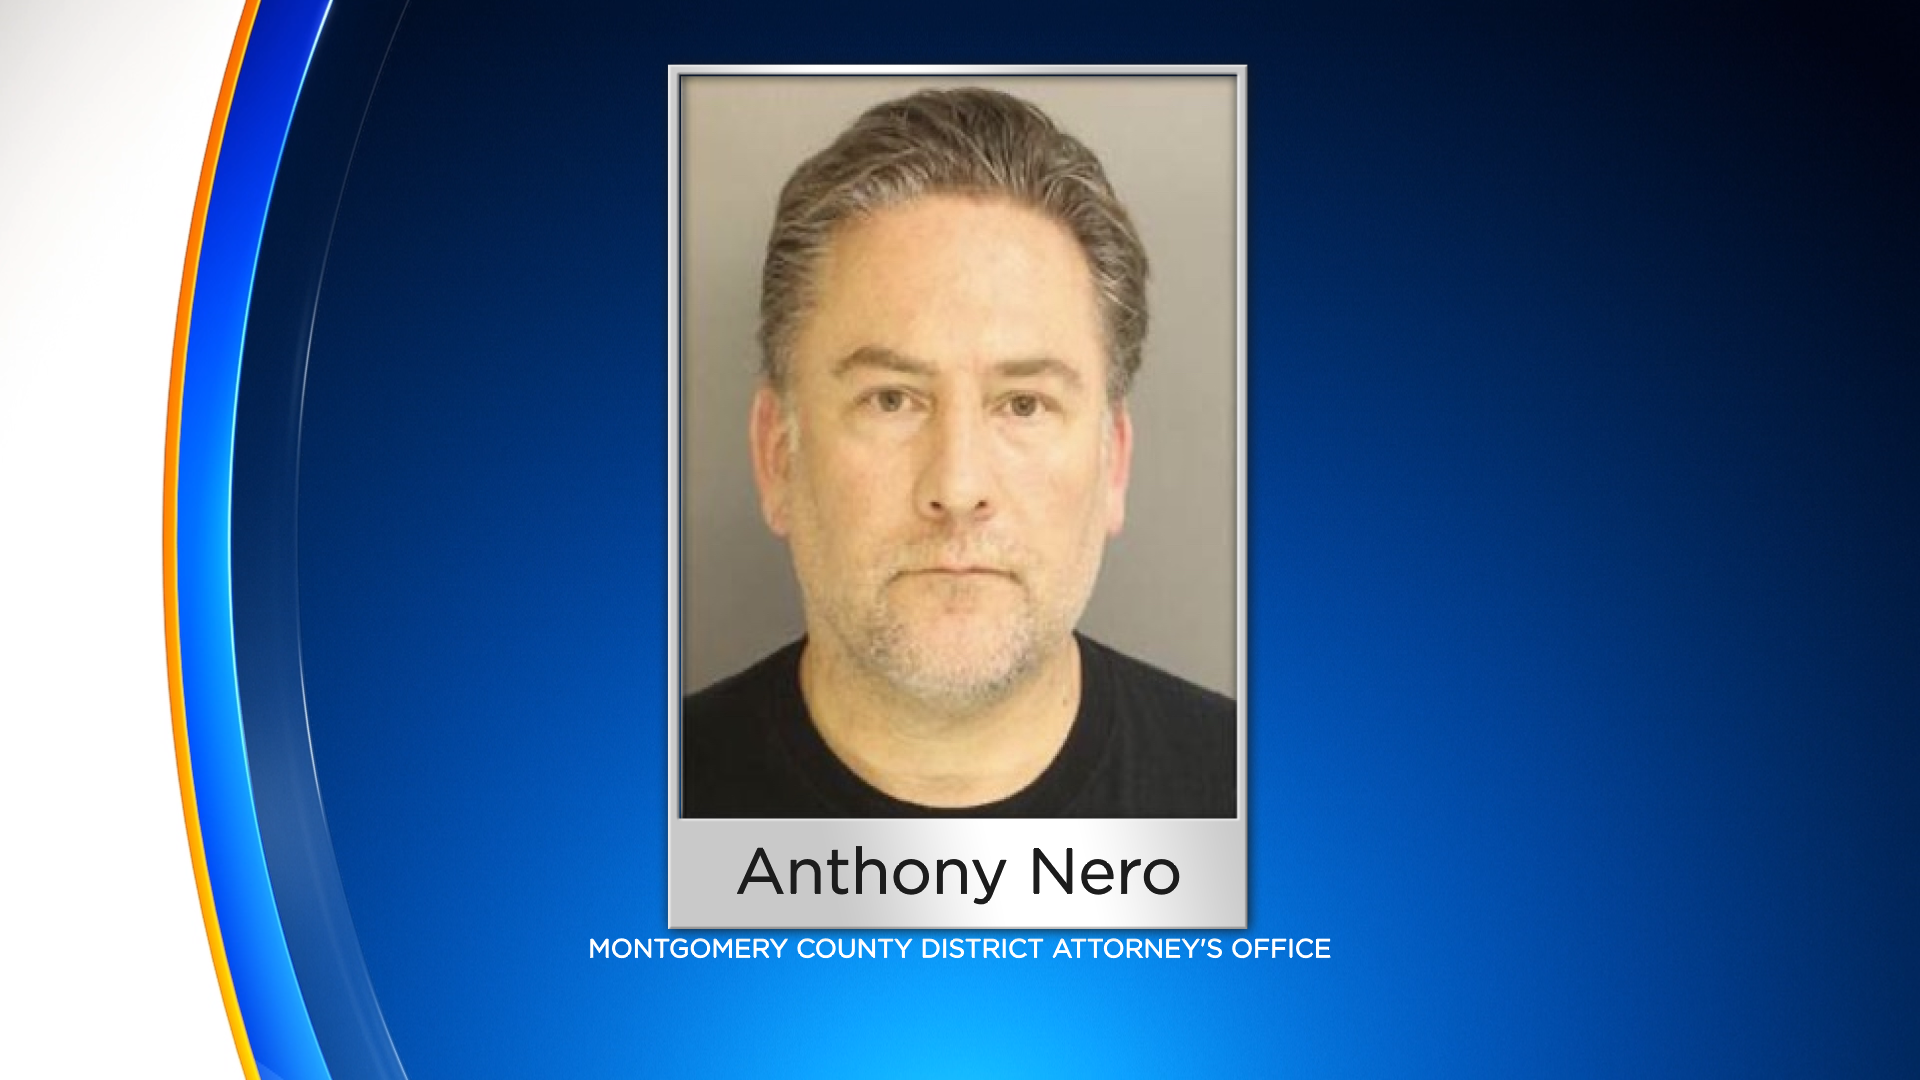 Man Pleads Guilty To Montgomery County Democratic Committee Office Shooting After Threatening Email